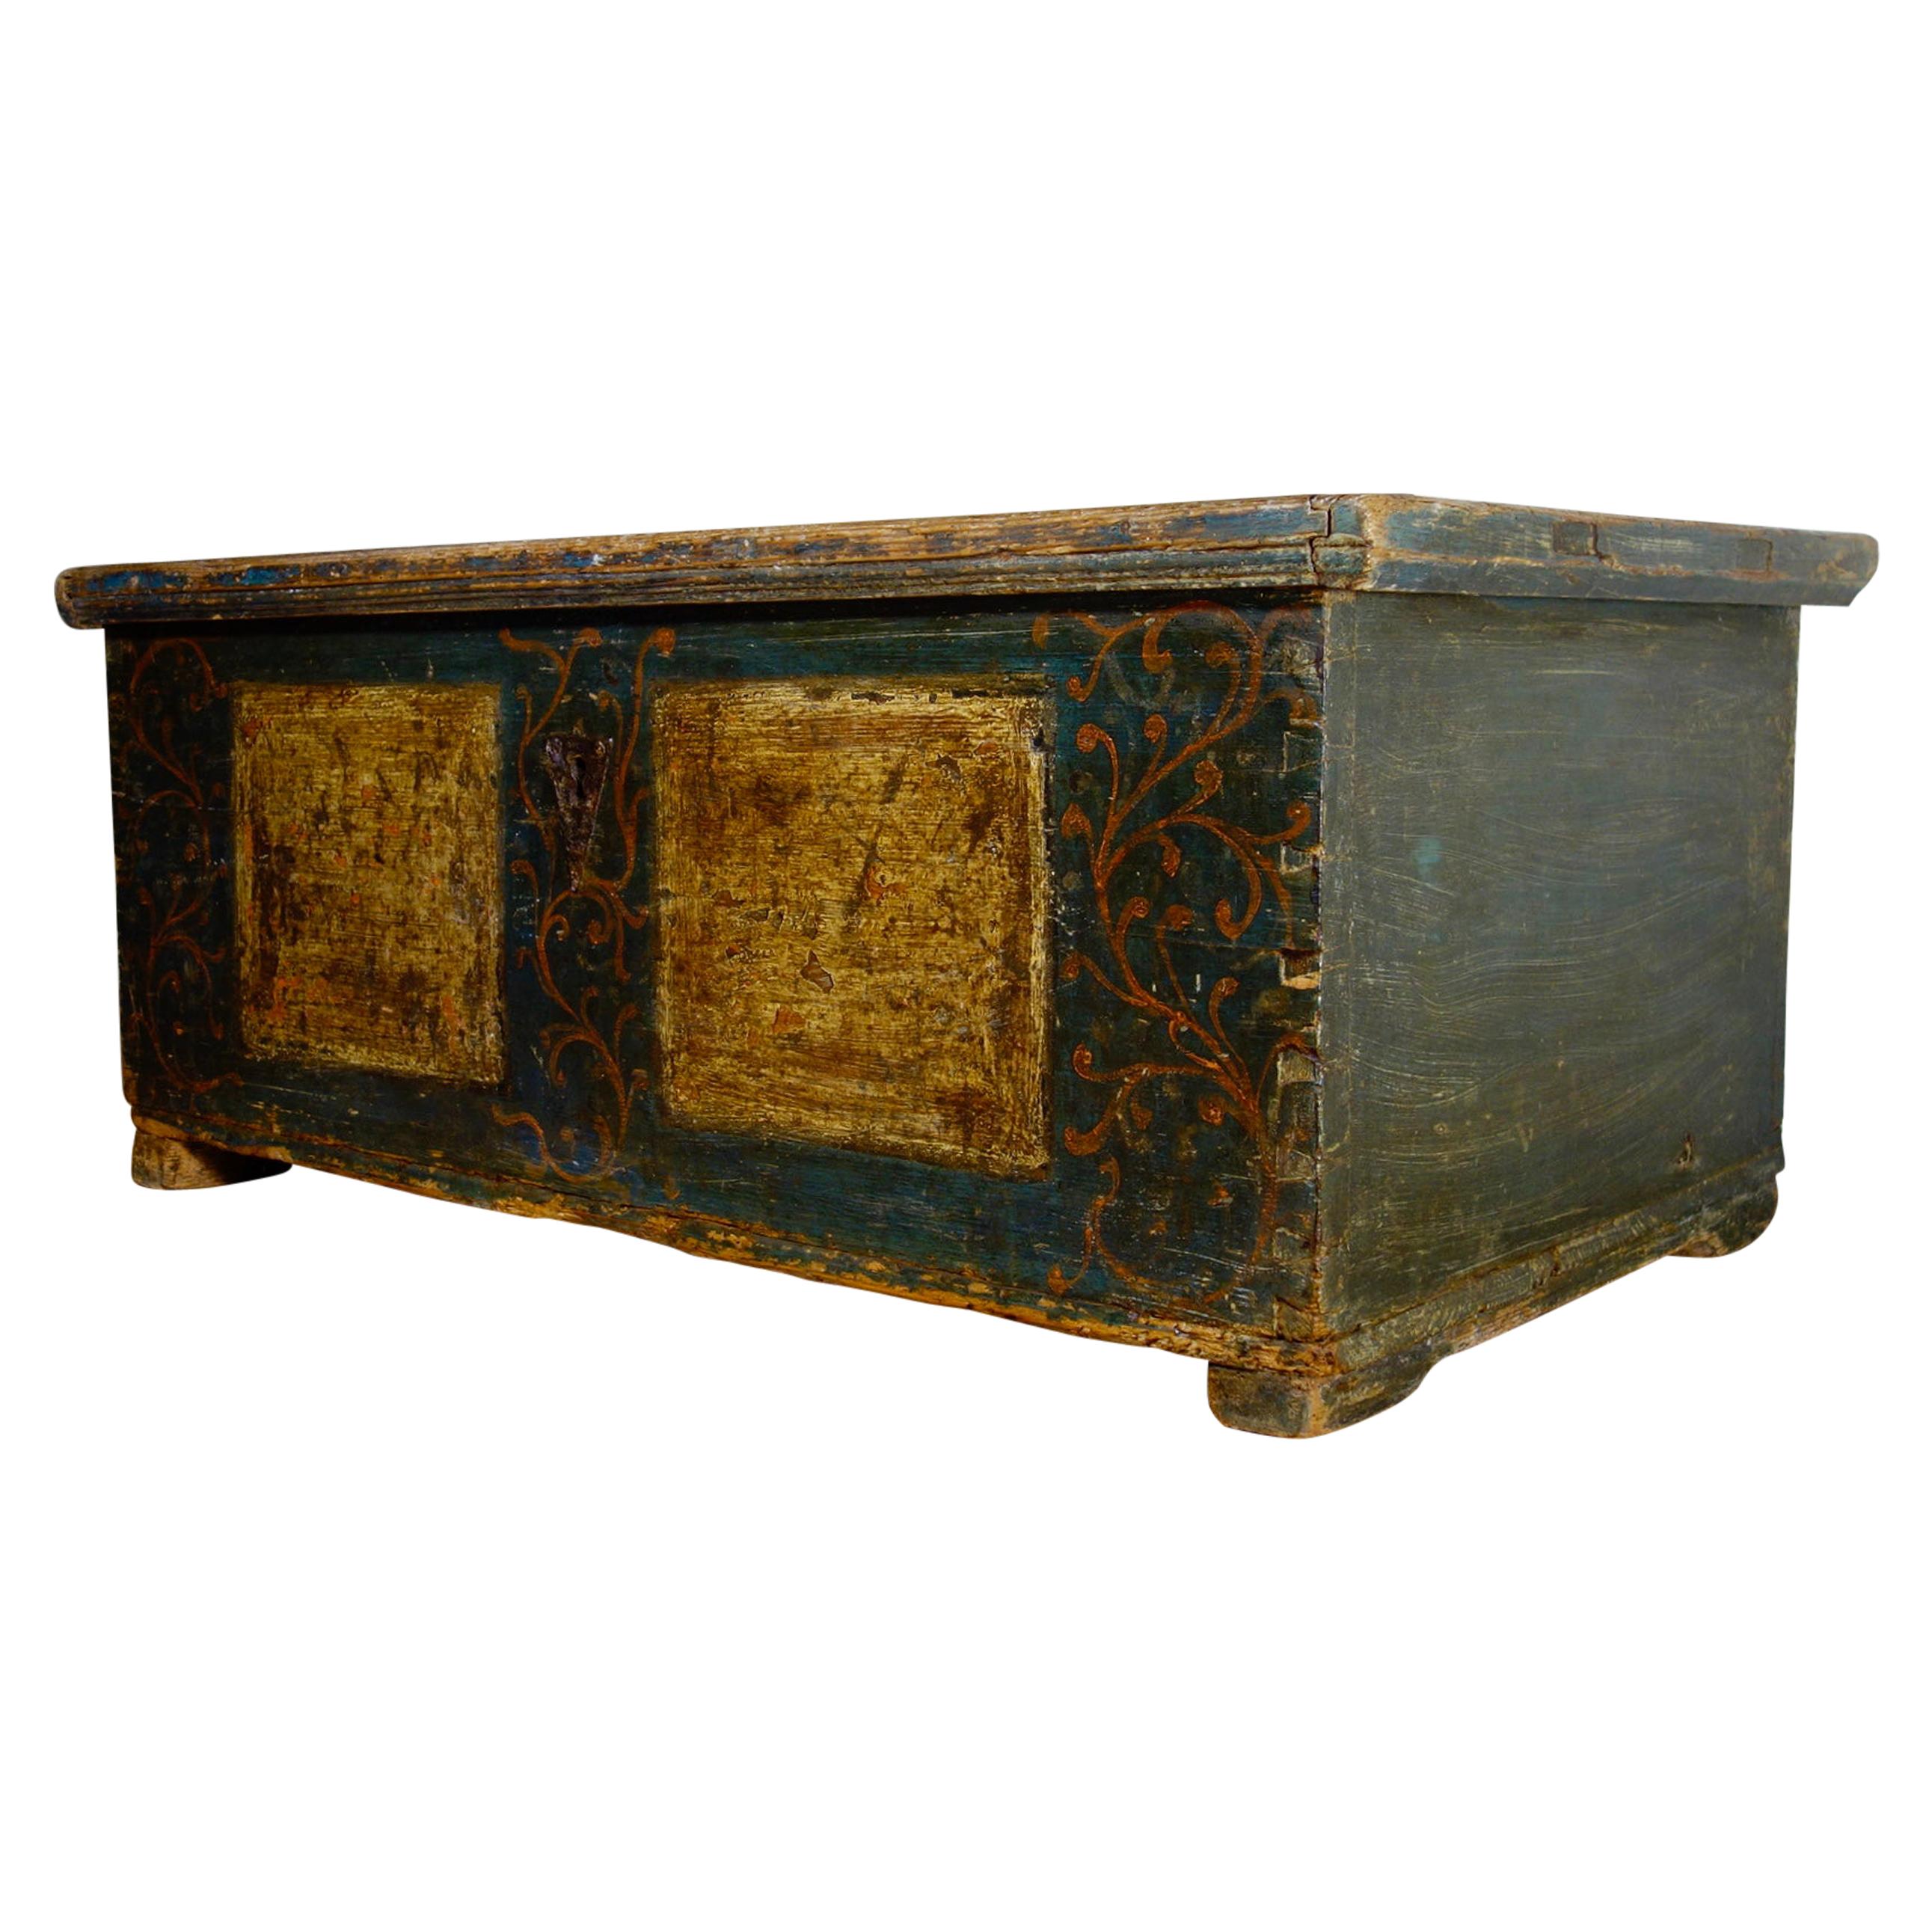 A Late 18th Century Continental Original Painted Dowry Chest, Trunk Coffee Table